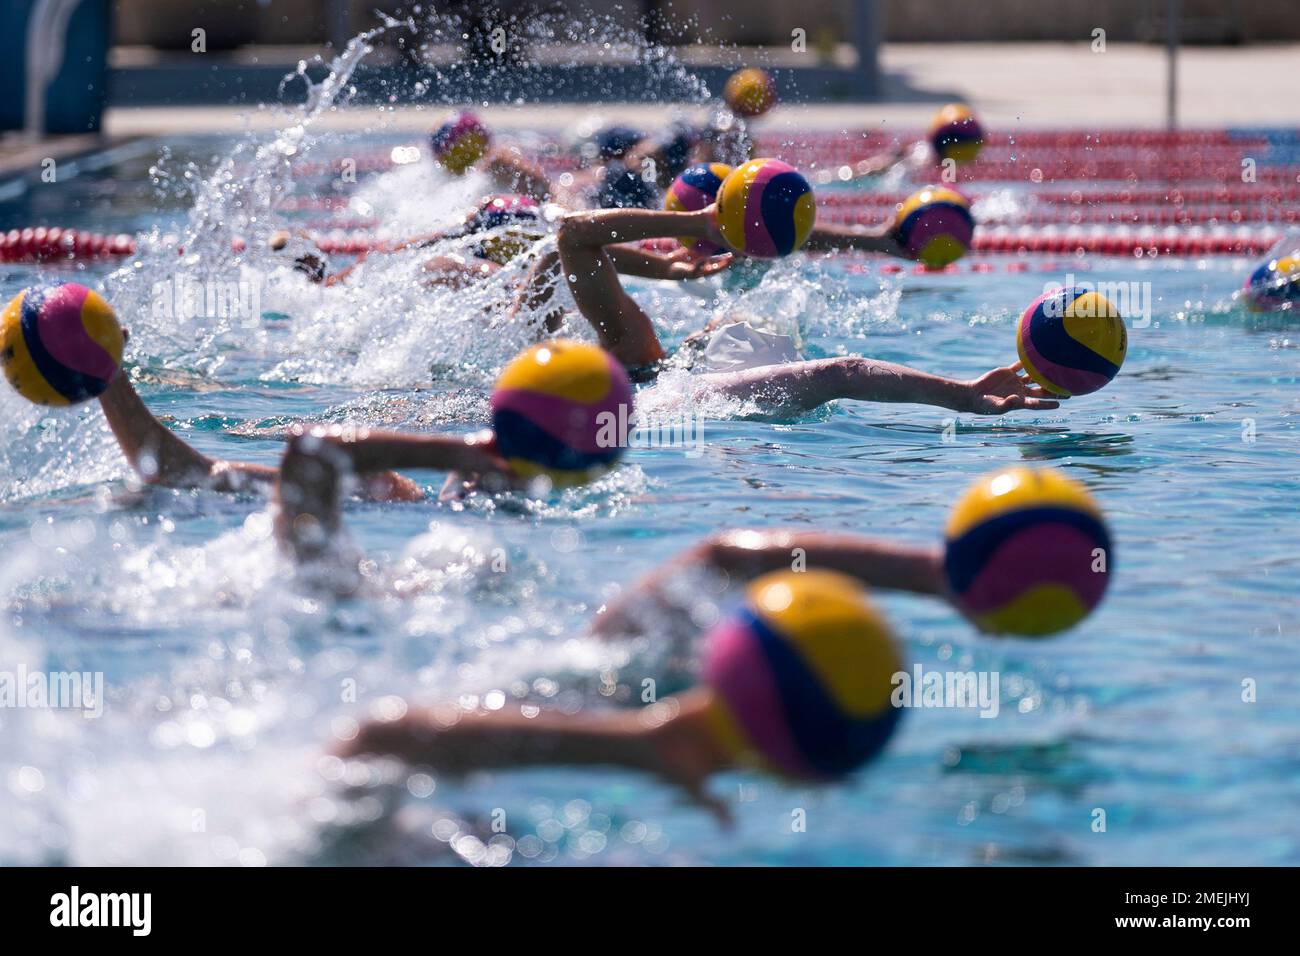 Members of U.S. women's water polo team train at MWR Aquatic Training  Center in Los Alamitos, Calif., Tuesday, April 27, 2021. When the Tokyo  Olympics was postponed because of the COVID-19 pandemic,